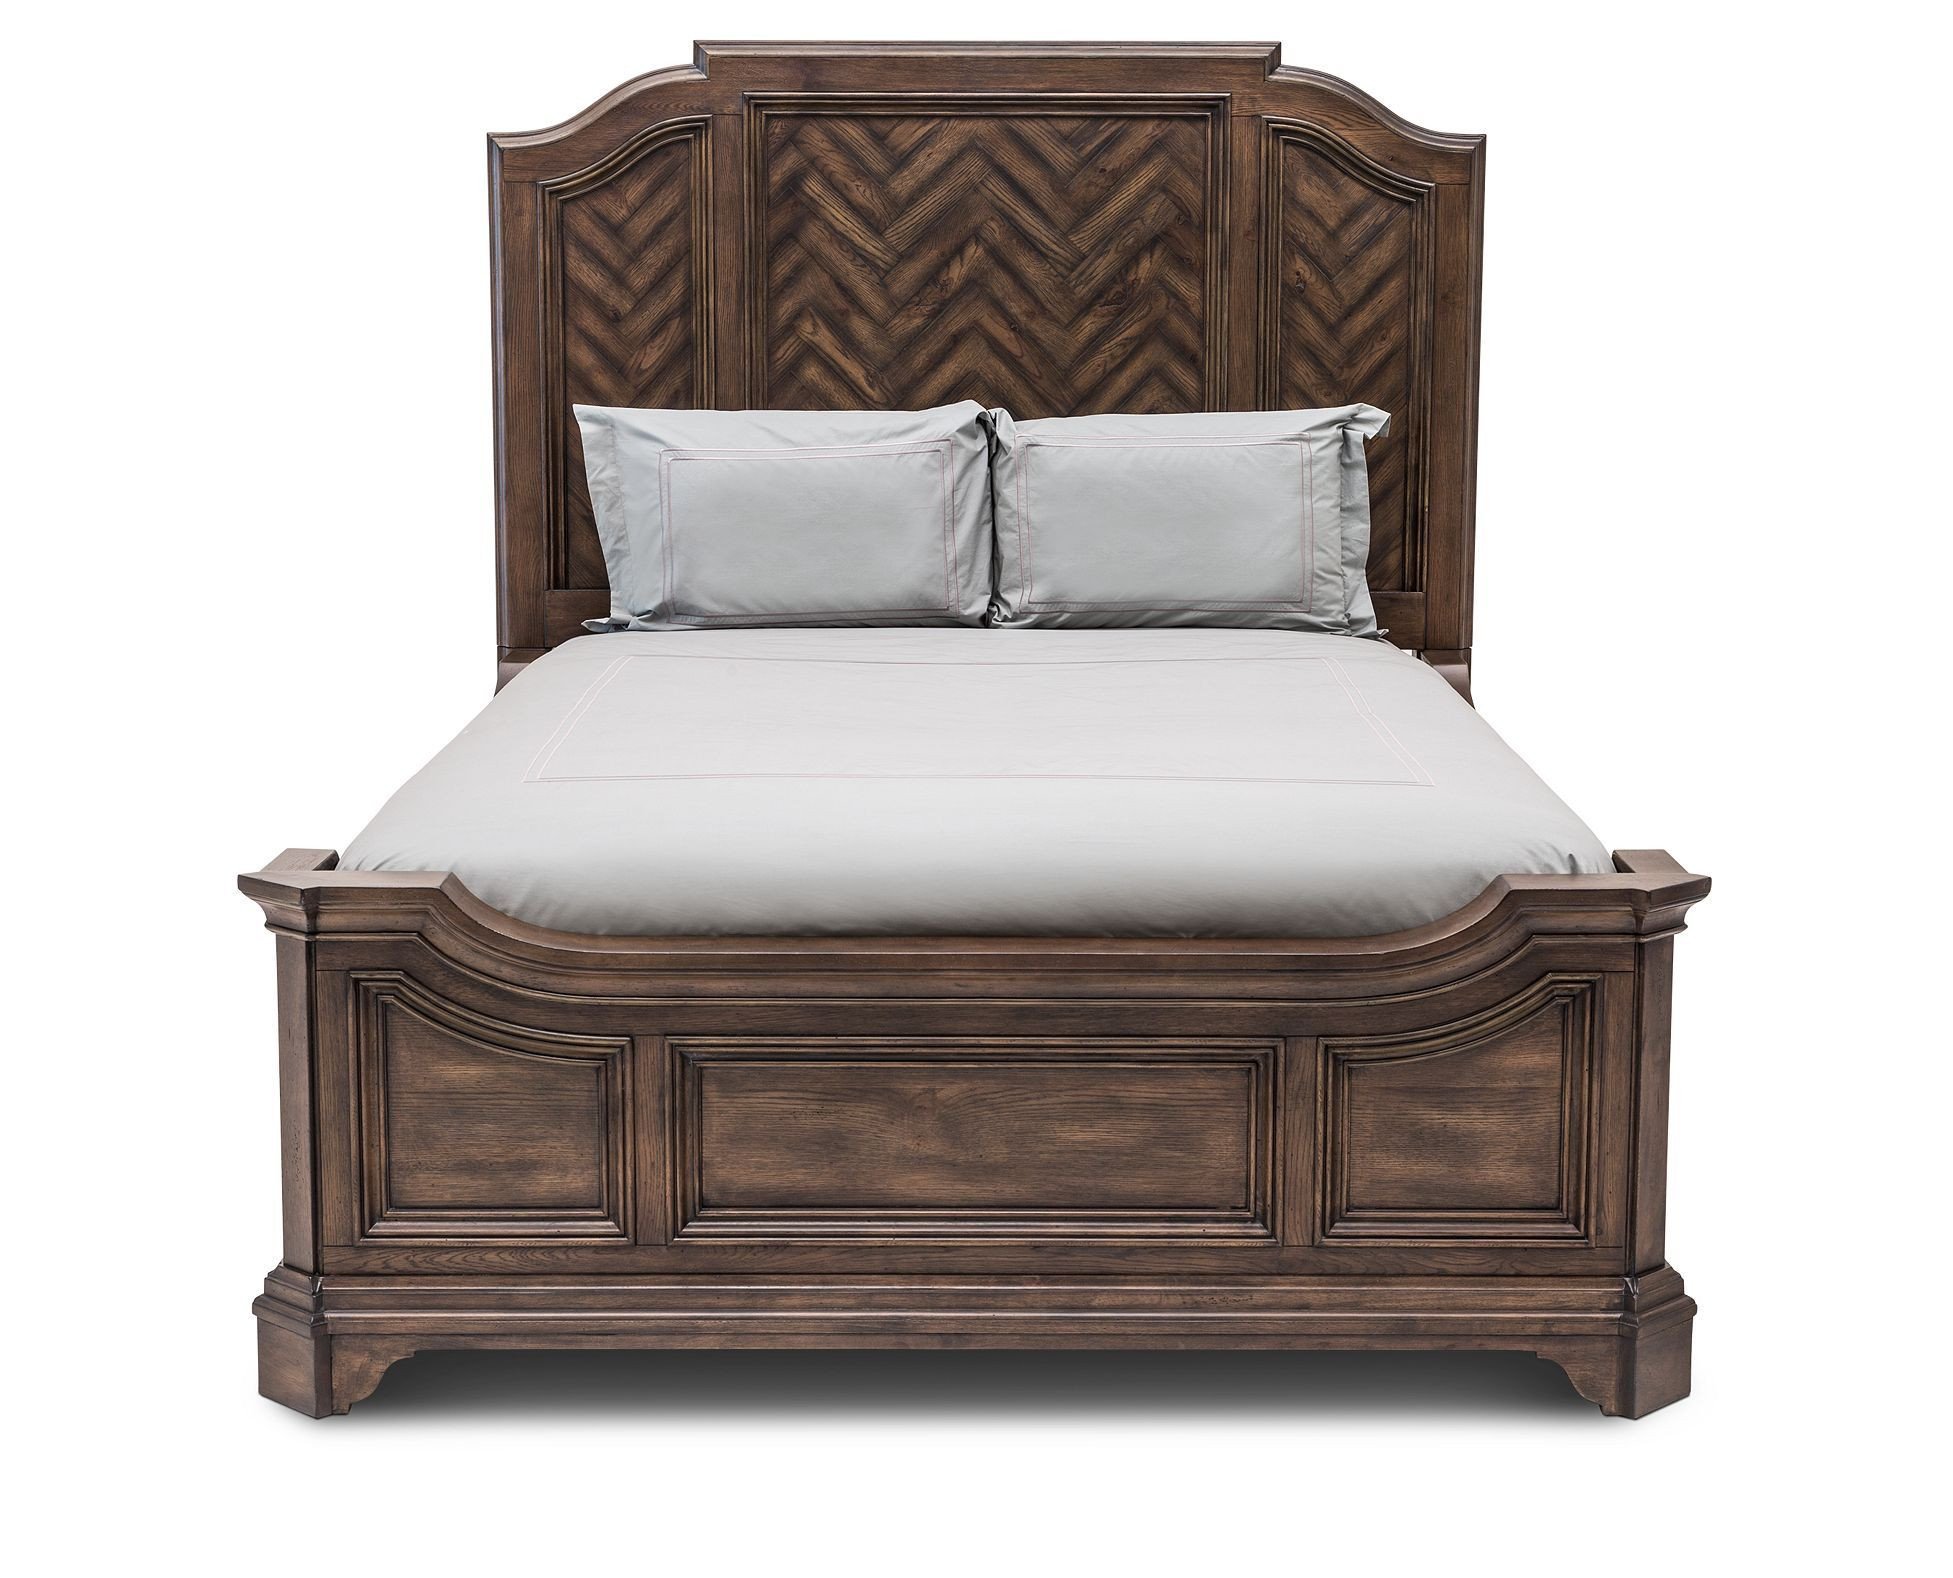 Wood and Metal Bedroom Awesome theodore Panel Bed Bedroom In 2019